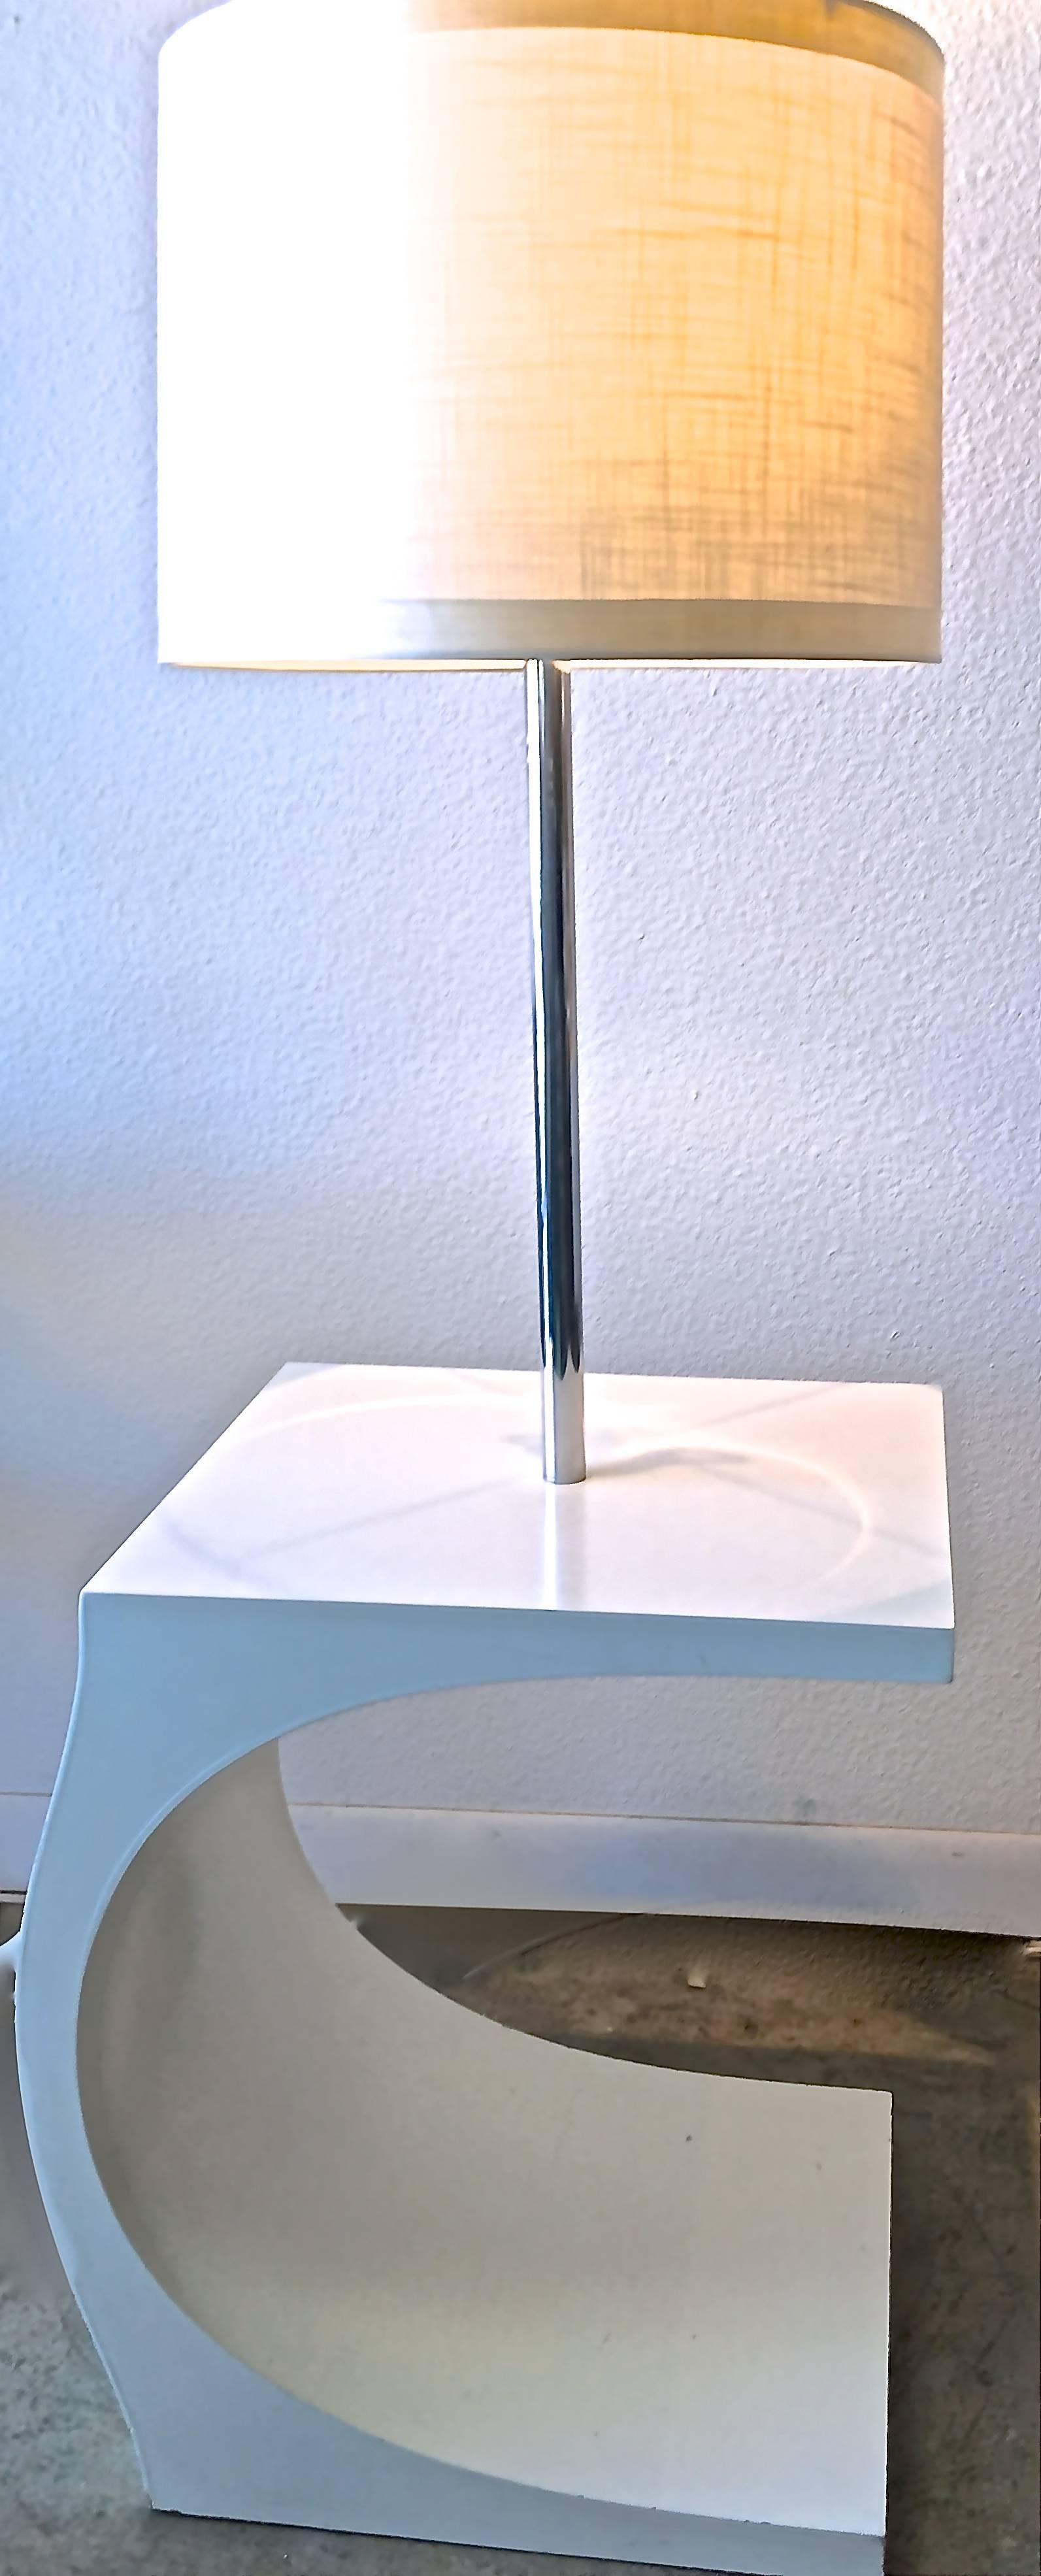 Thoroughly modern Modeline cantilevered c-shaped lamp table from the early 1970s. White lacquered wood base with chrome pole and crisp, textured new white shade. Sleek, groovy, whimsical.